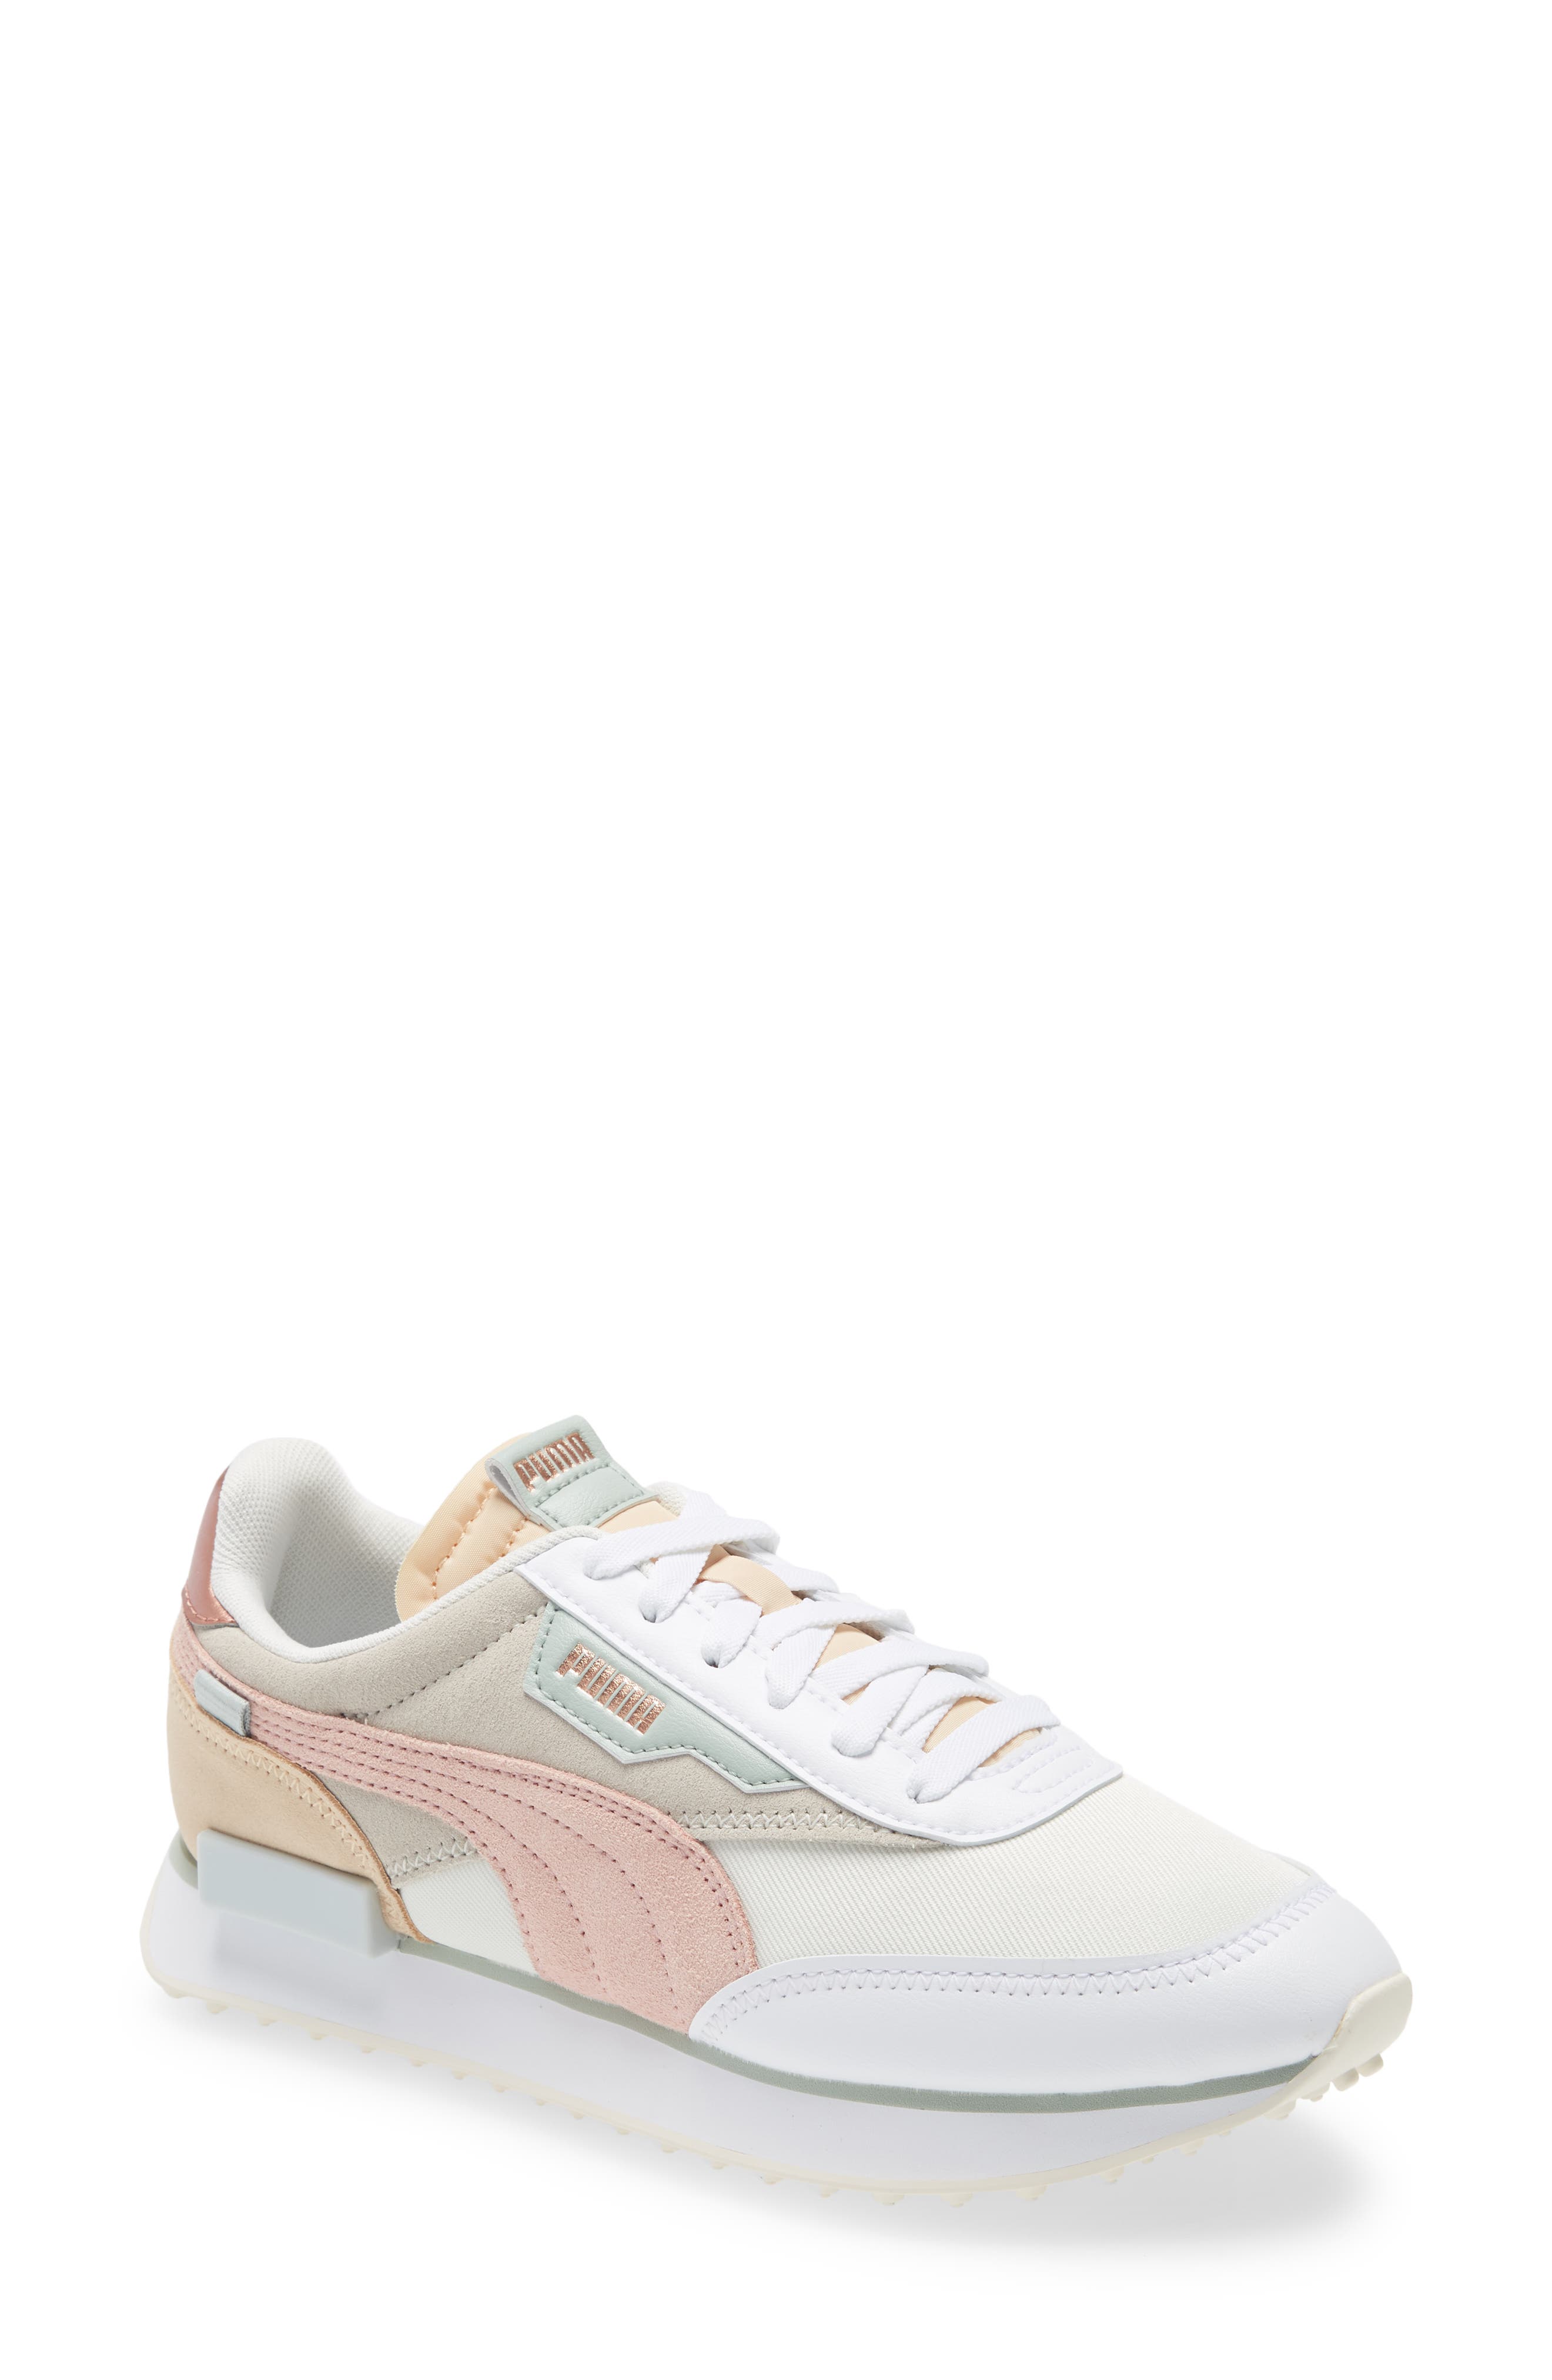 Women's Sneakers PUMA Shoes | Nordstrom